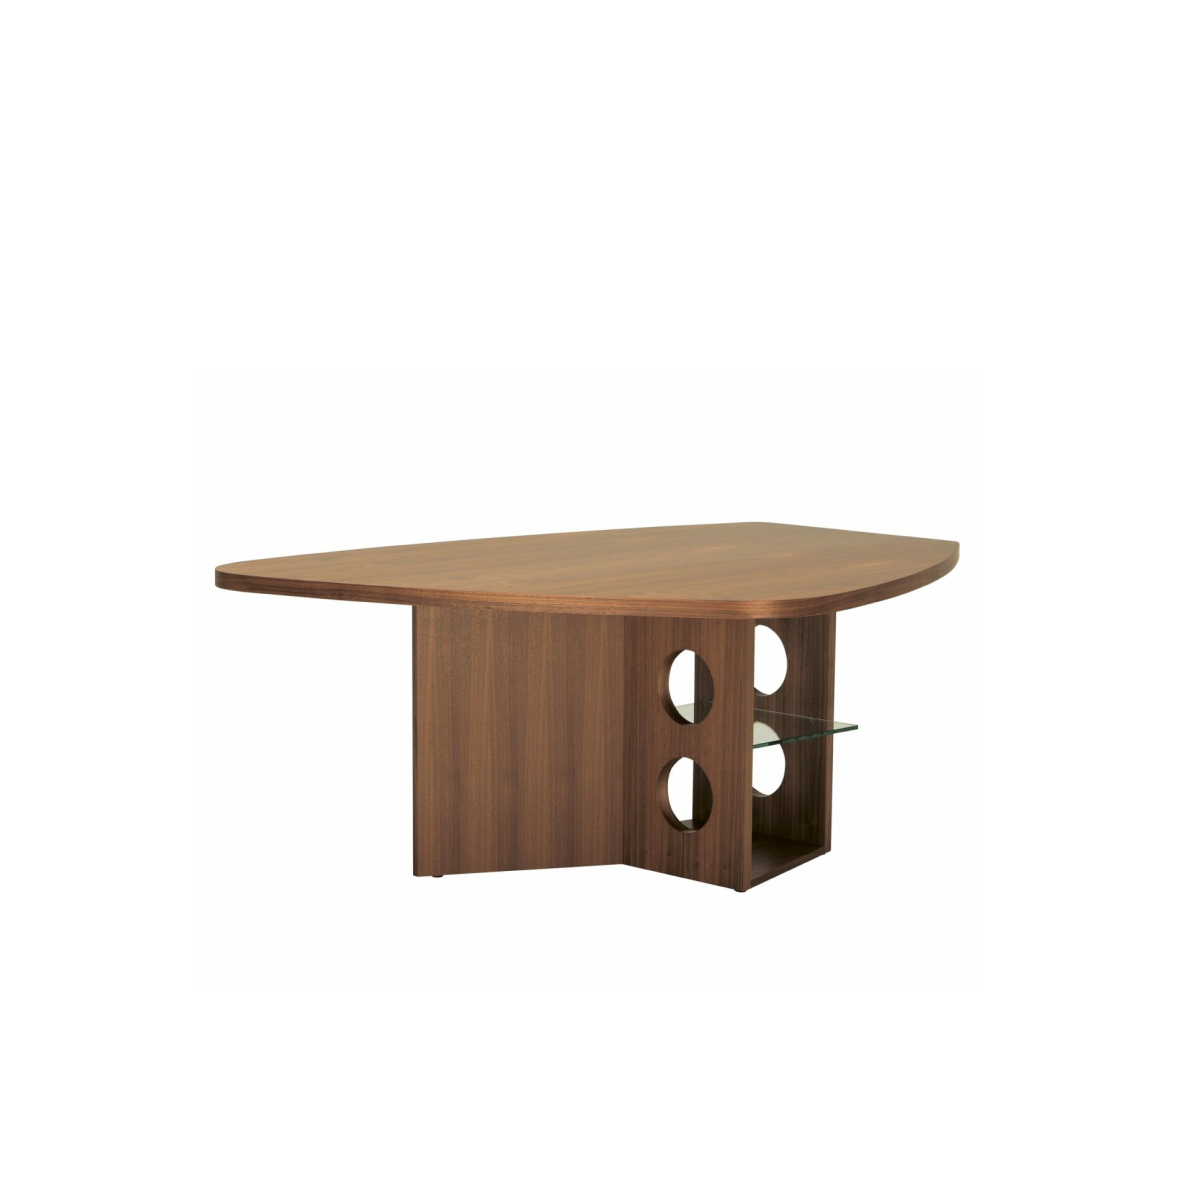 TECTA M21-1/M21 Dining, Conference or Executive Desk - Walnut